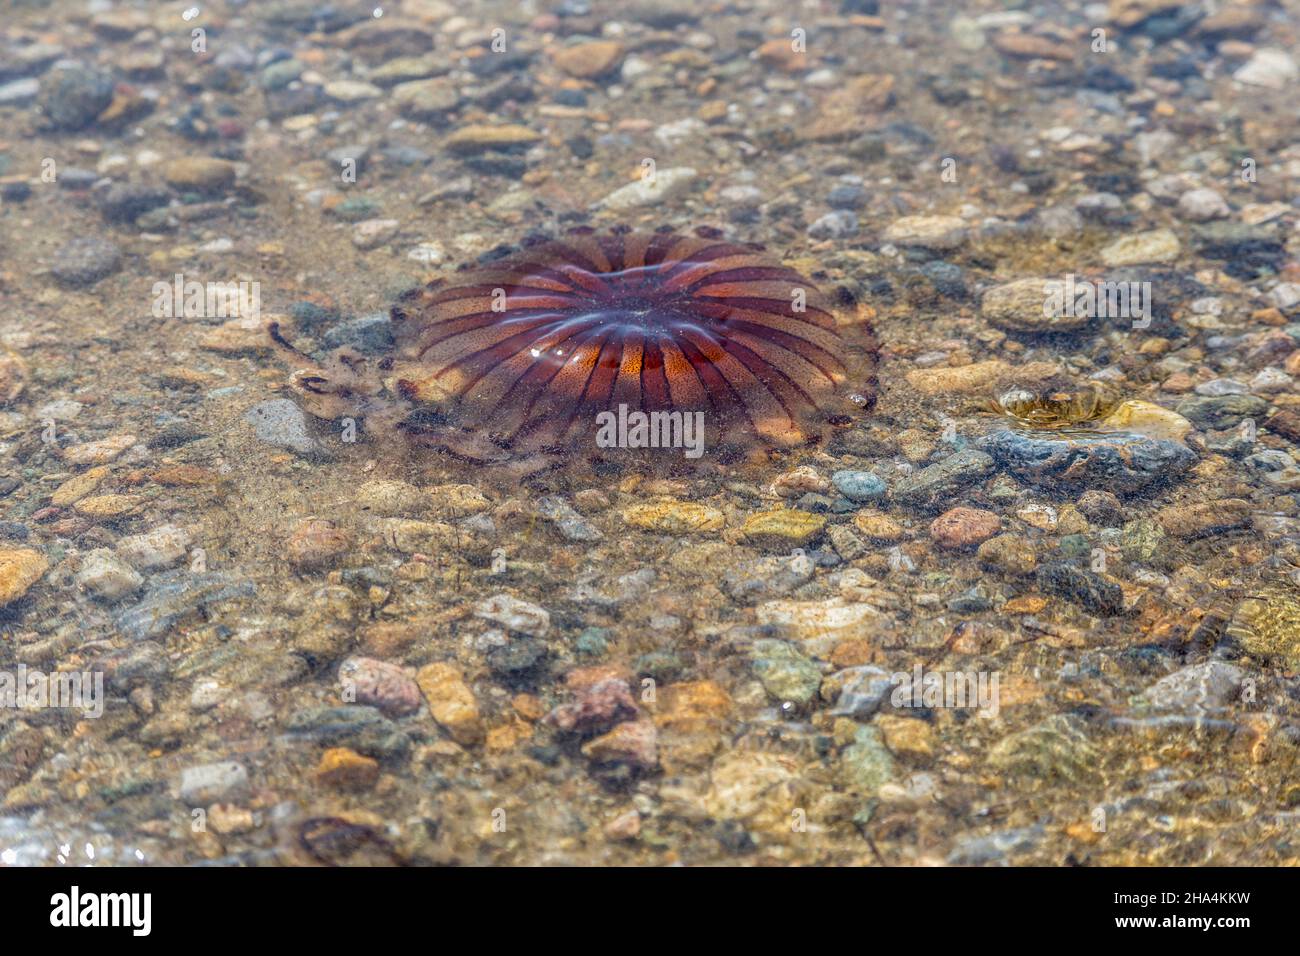 close-up of a red jellyfish at the beach in greece, Stock Photo